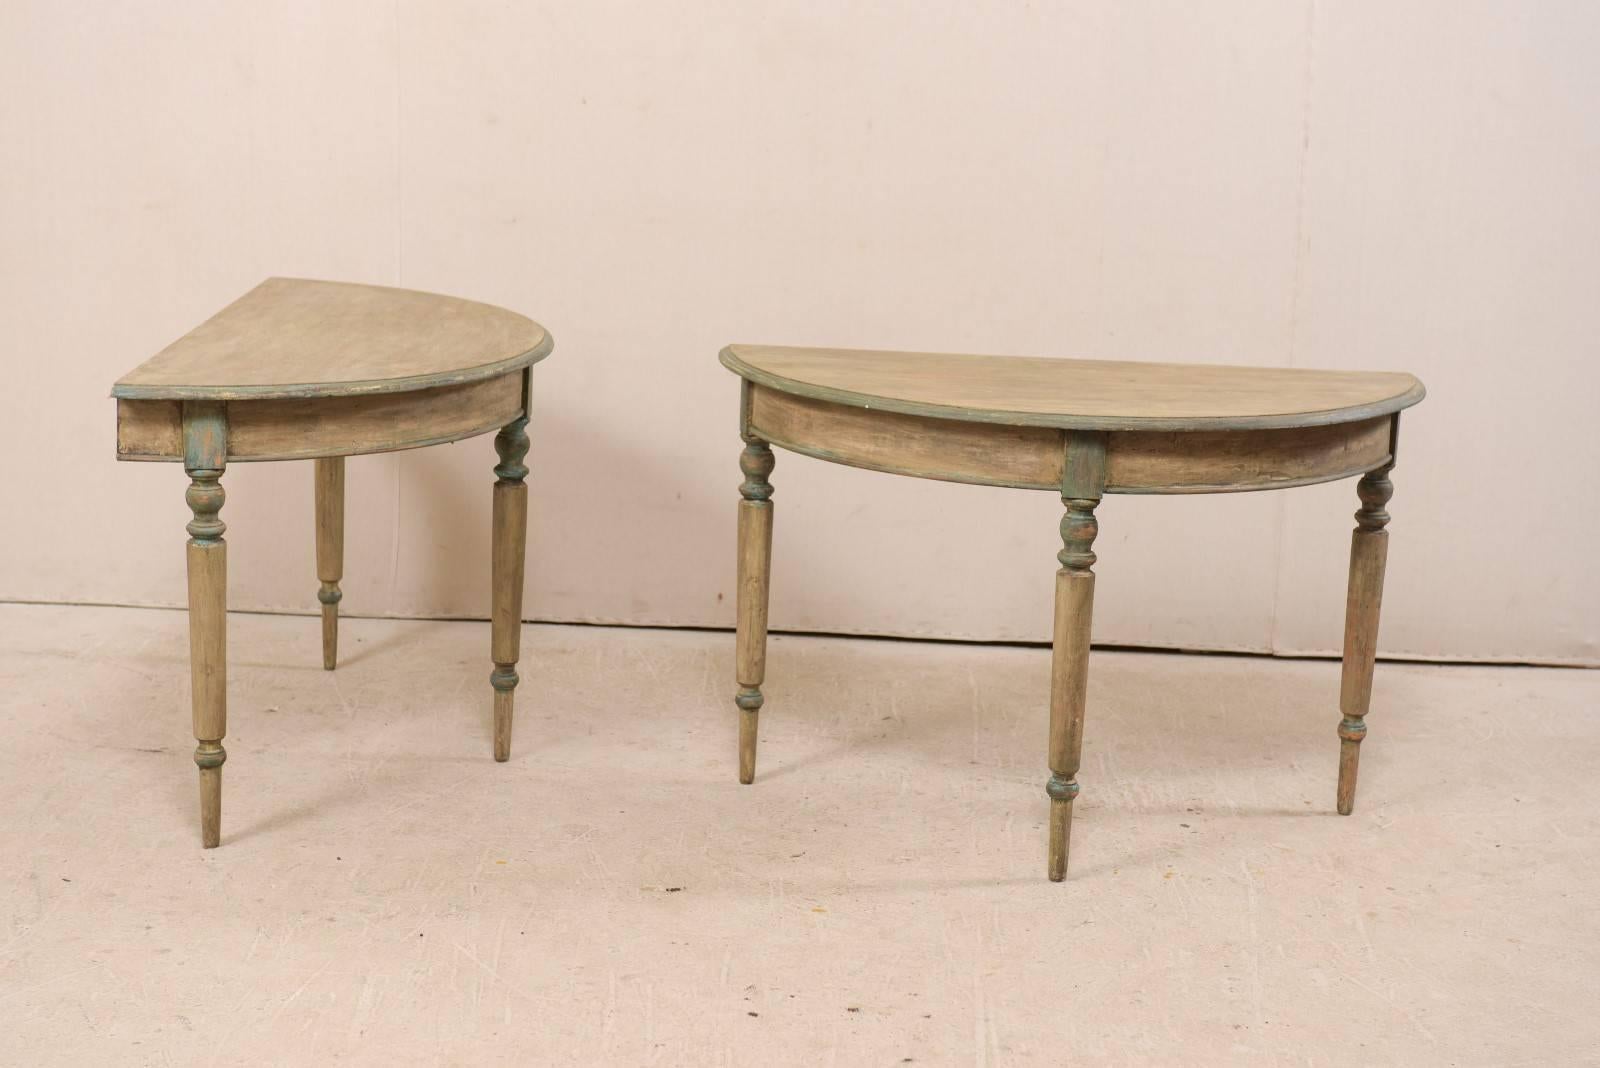 Pair of 19th Century Swedish Painted Wood Demi-Lune Tables with Turned Legs 1